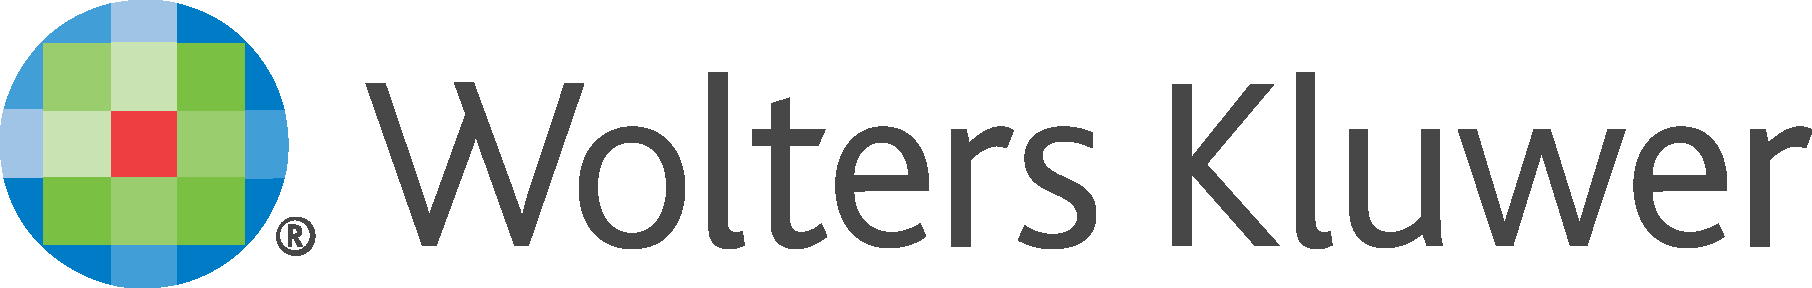 Wolters-Kluwer-Logo